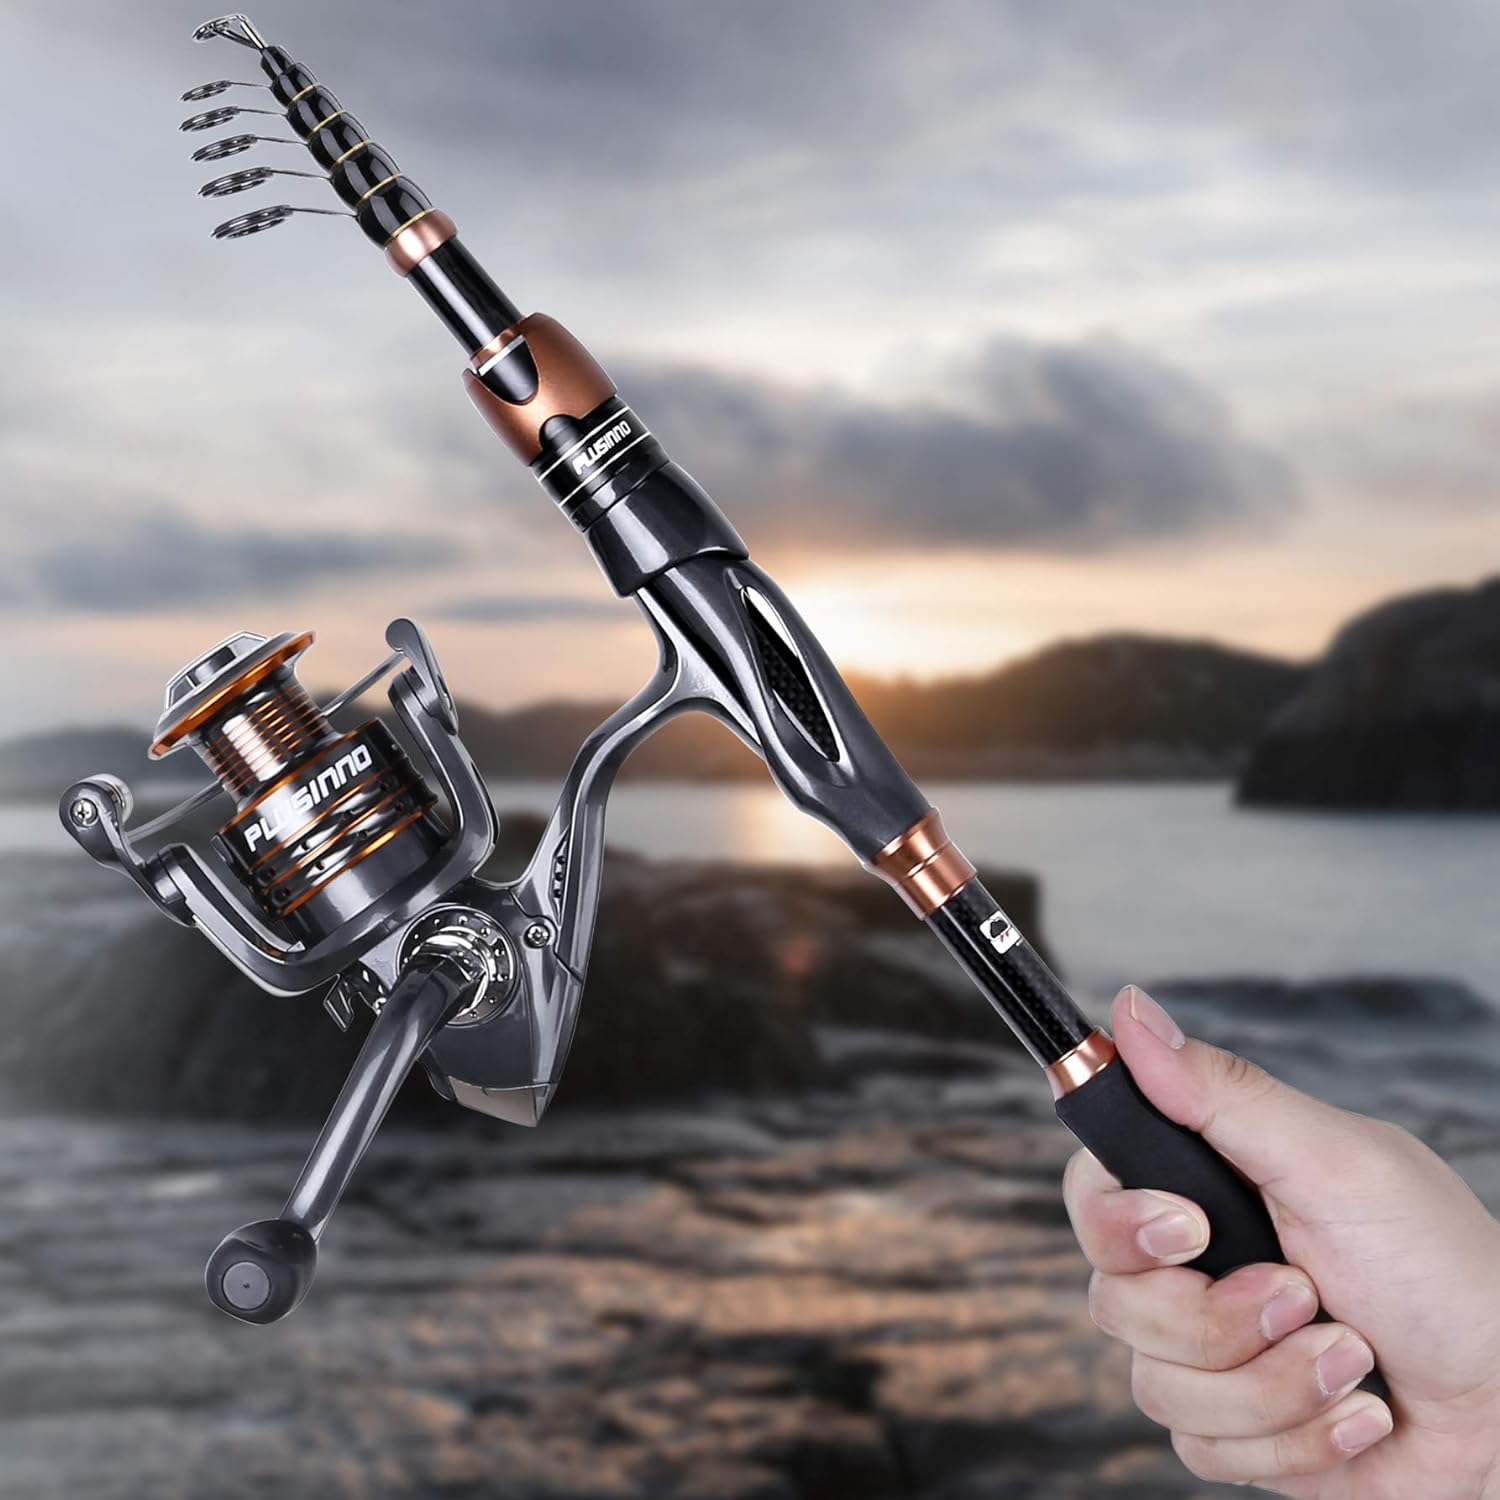 Fishing Rod and Reel Combos, Bronze Warrior Toray 24-Ton Carbon Matrix Telescopic Fishing Rod Pole, 12 +1 Shielded Bearings Stainless Steel BB Spinning Reel, Travel Freshwater Fishing Gear